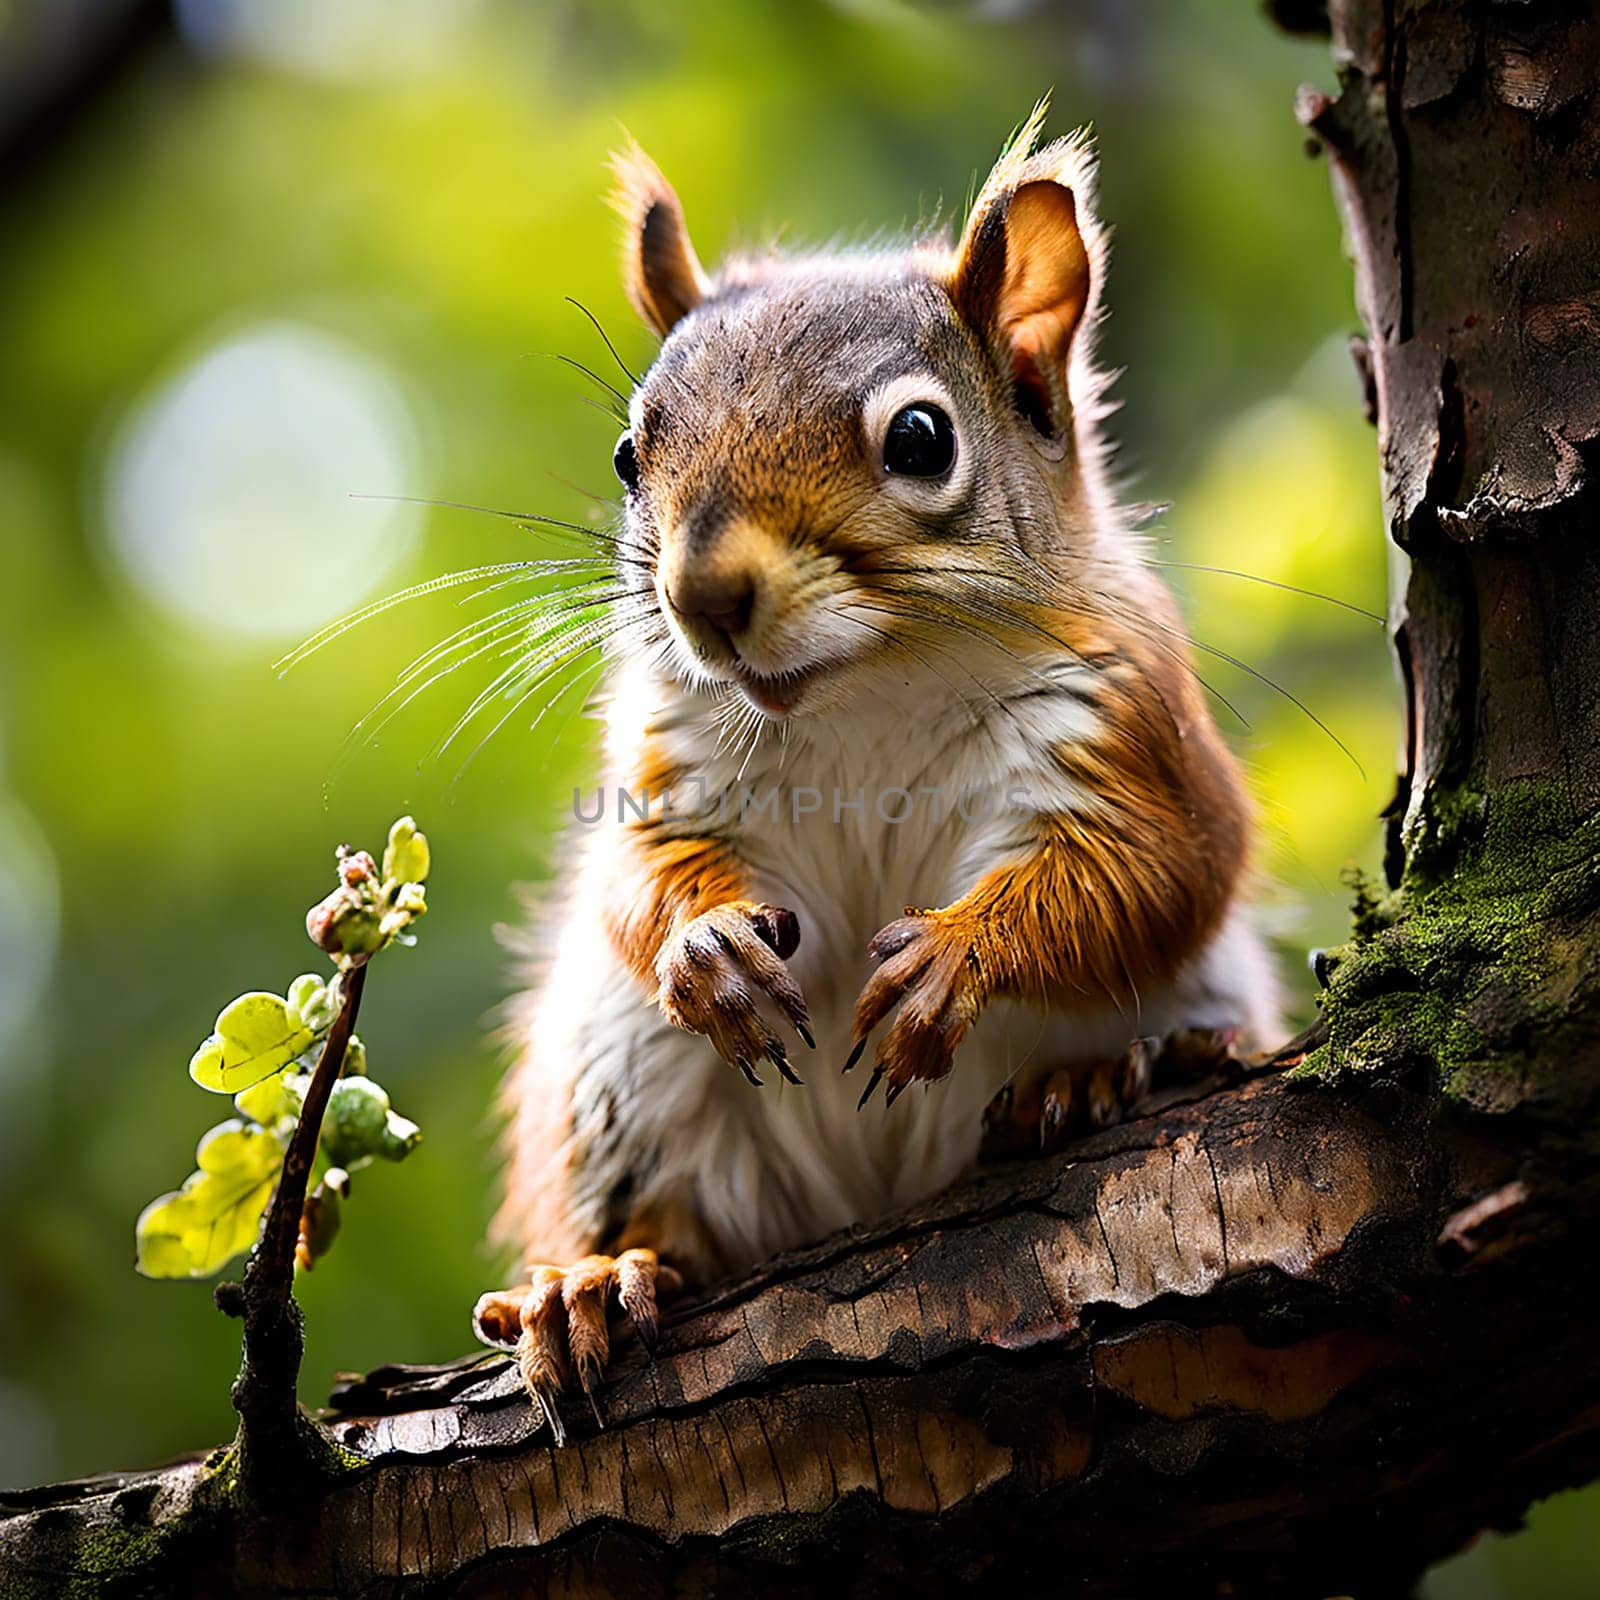 The Watchful Observer: A Squirrel Sitting on a Tree Branch